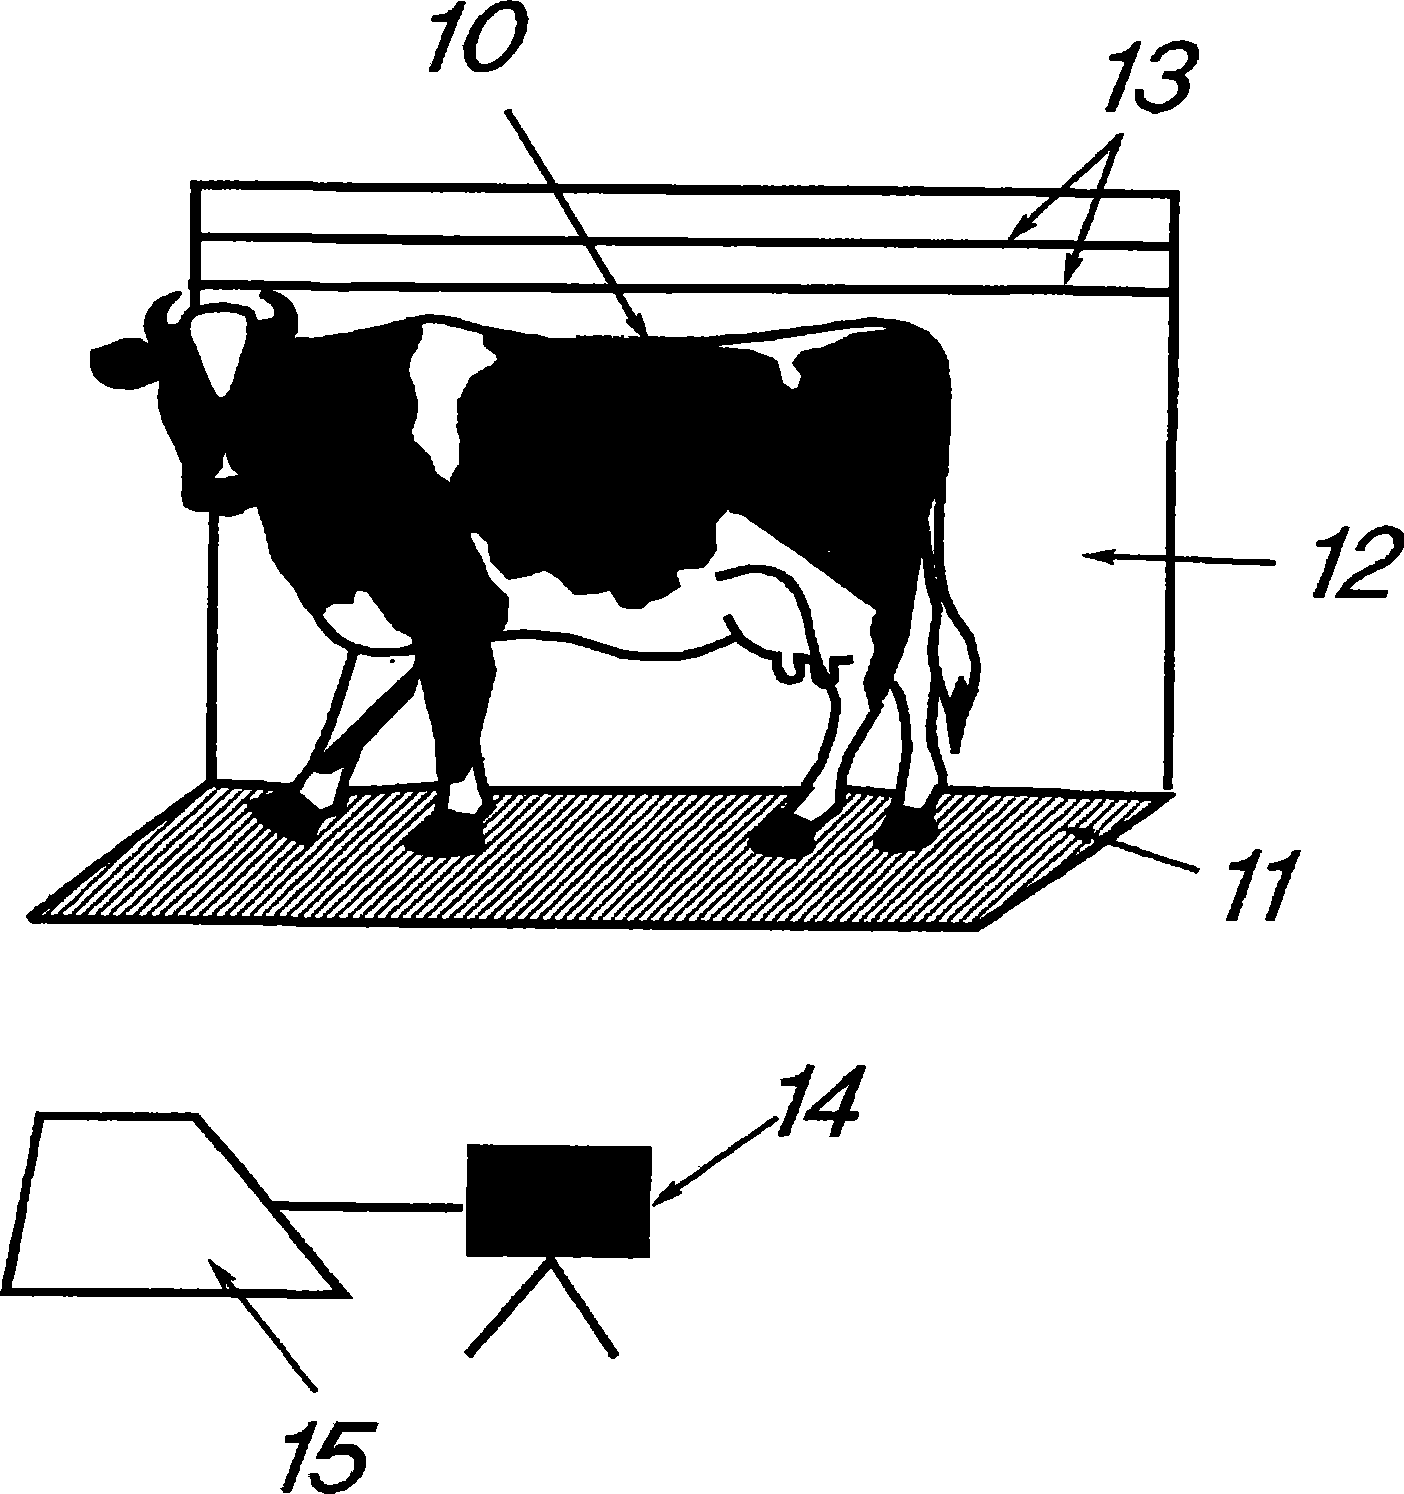 A method and a system for measuring an animal's height